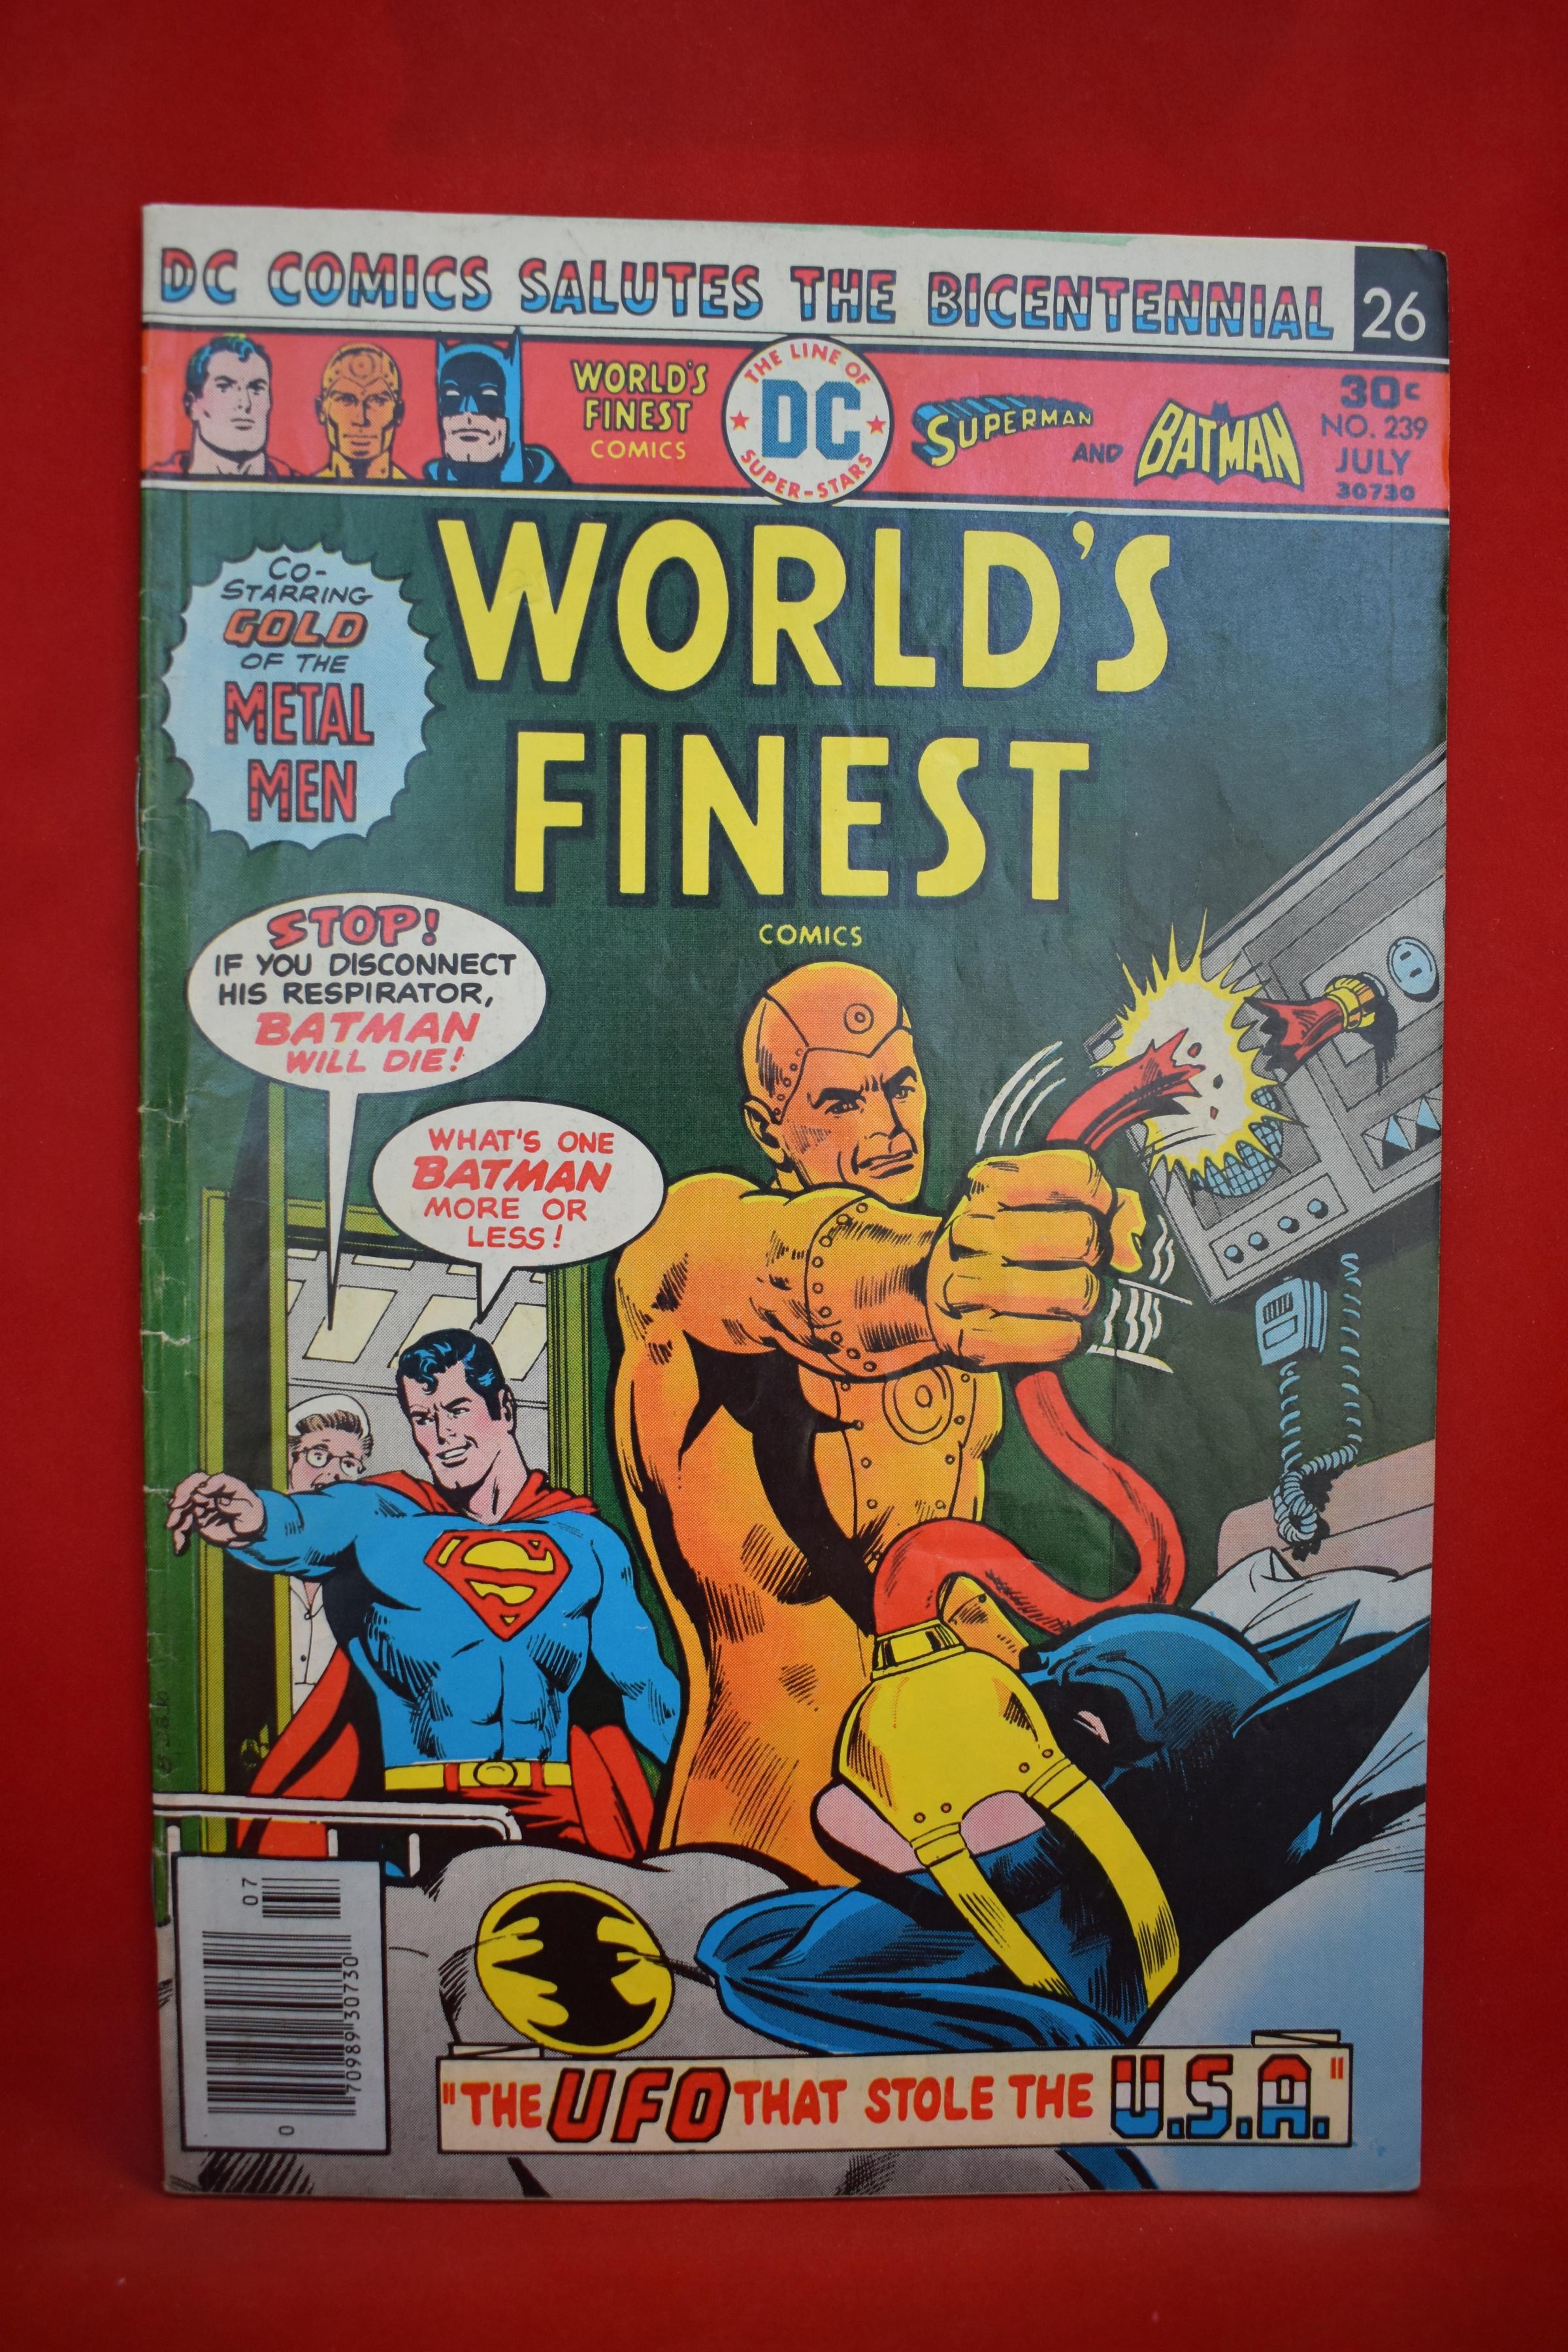 WORLDS FINEST #239 | THE UFO THAT STOLE THE USA! | ERNIE CHAN - 1976